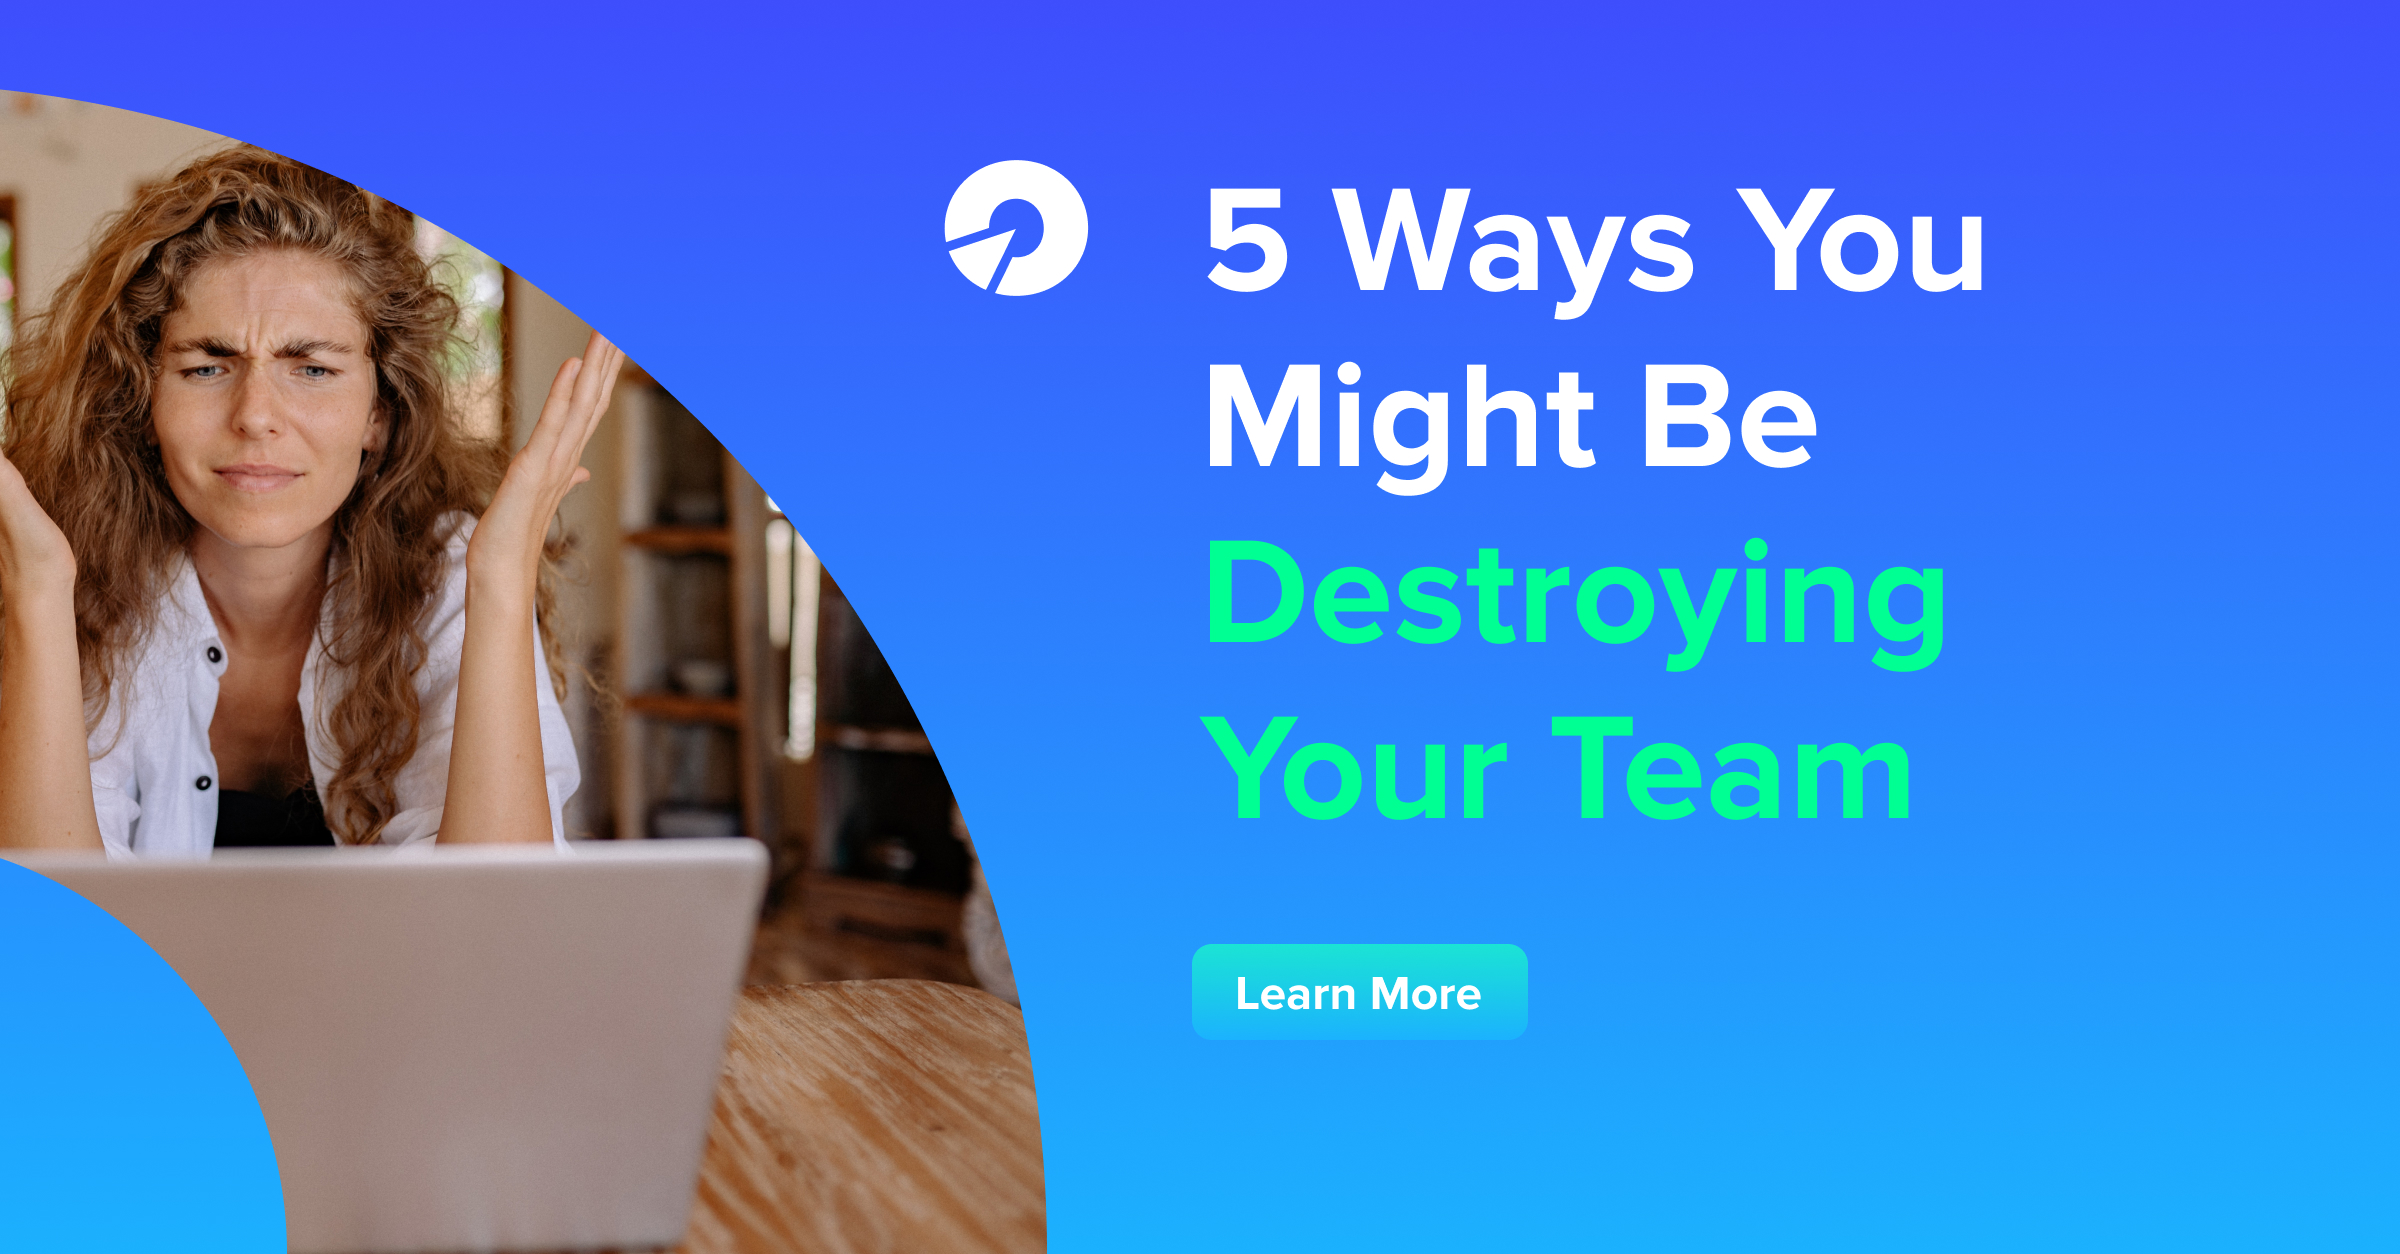 5 Ways You Might Be Destroying Your Team